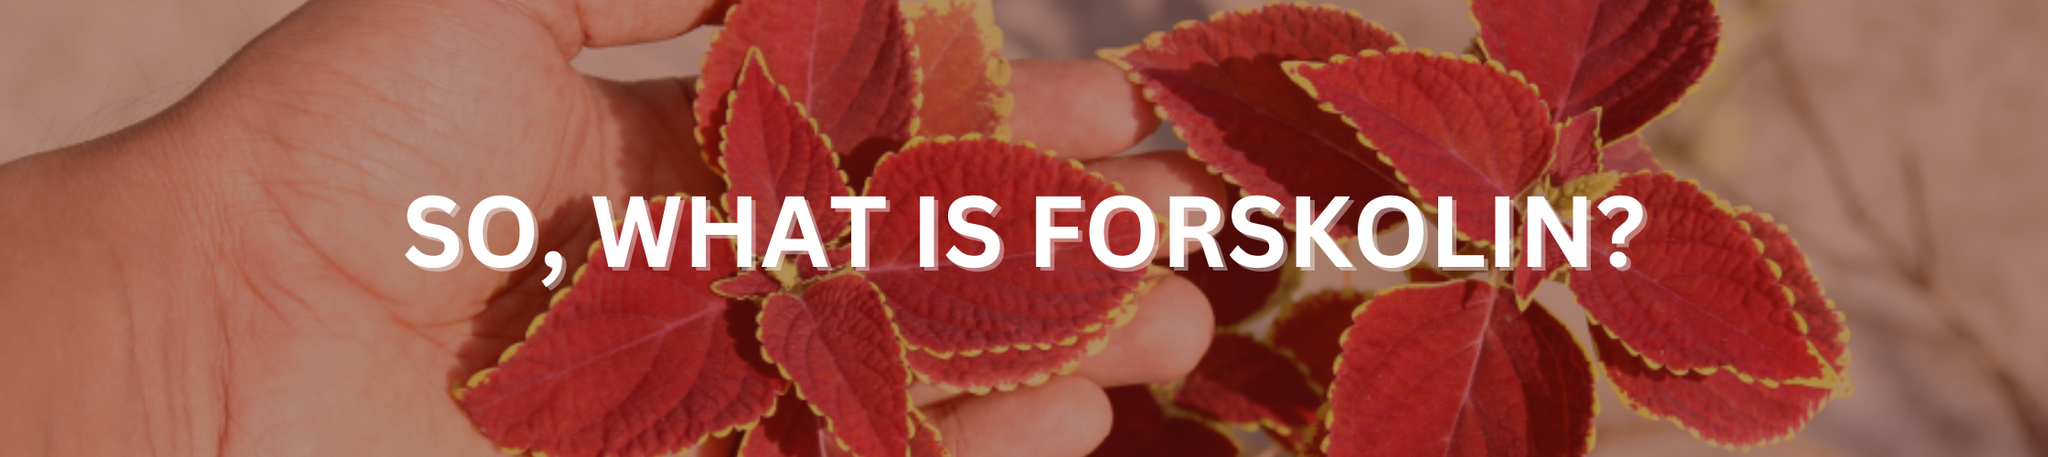 A hand folding a forskolin plant with a text "So, What Is Forskolin?"